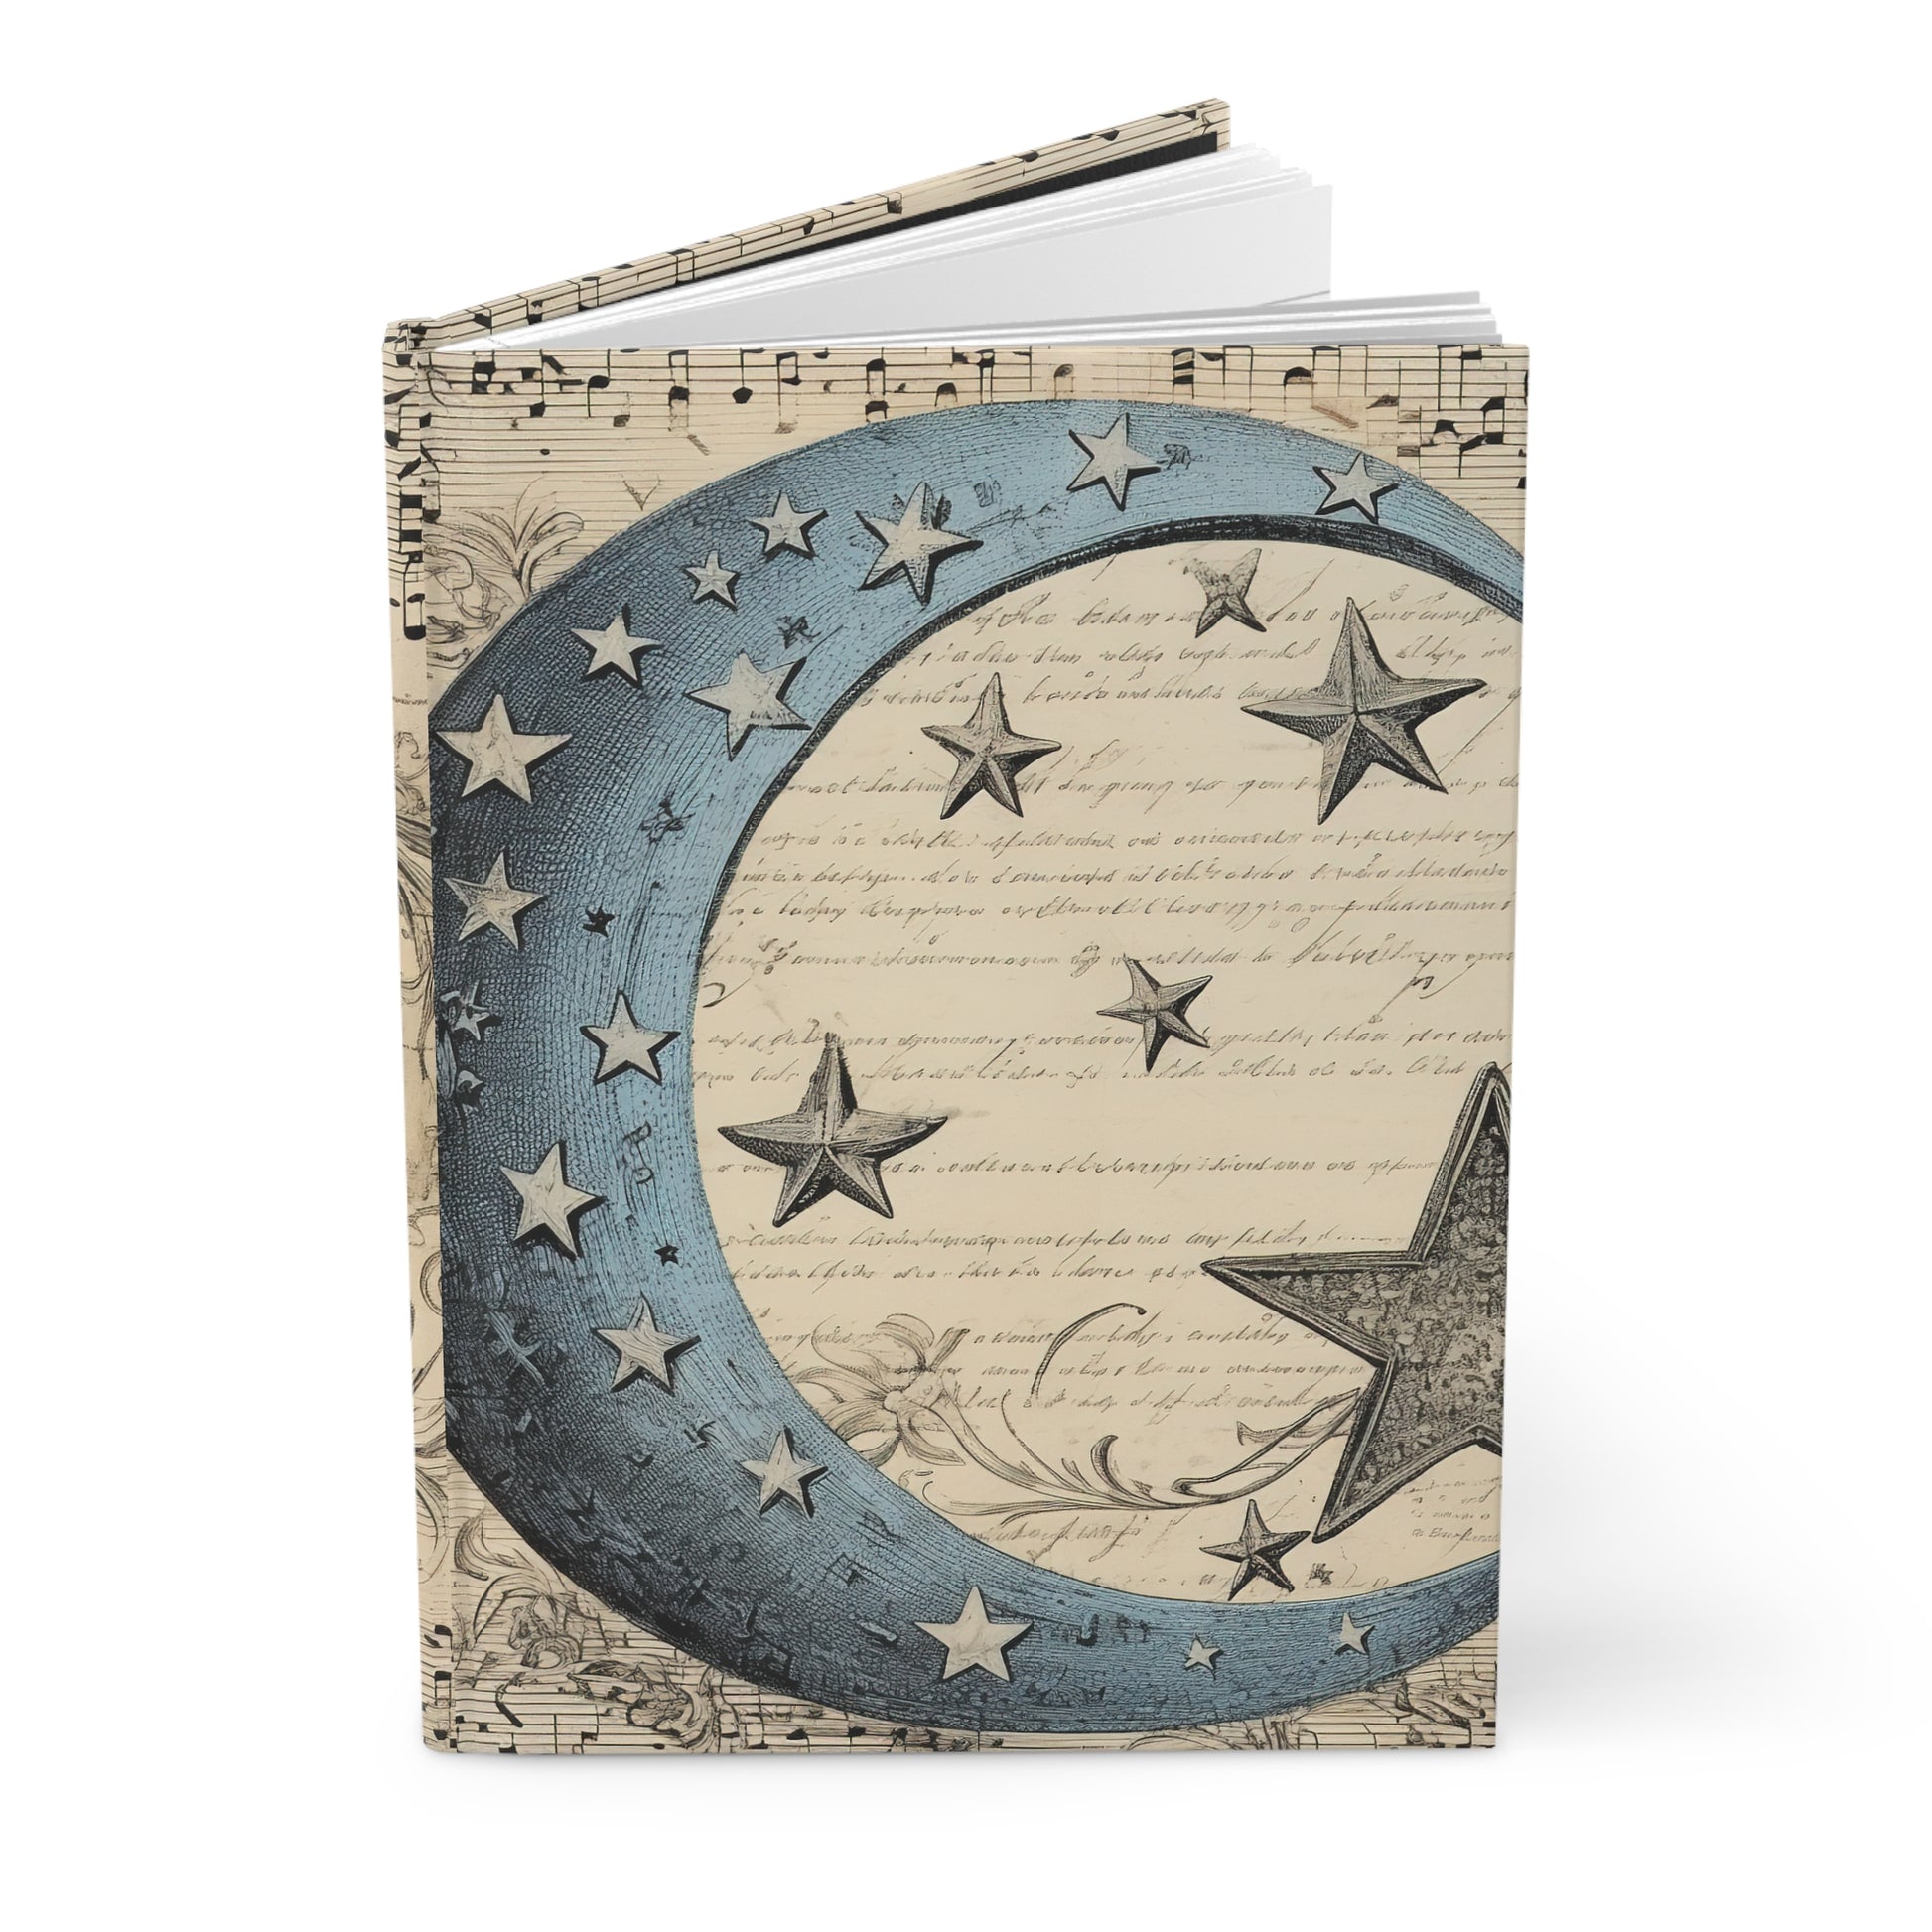 Sherri Smith designs merchandise for spiritual life. Enjoy writing your story with this beautiful Thoughts Are Things Affirmation Journal. Shop SmithRidge.farm.